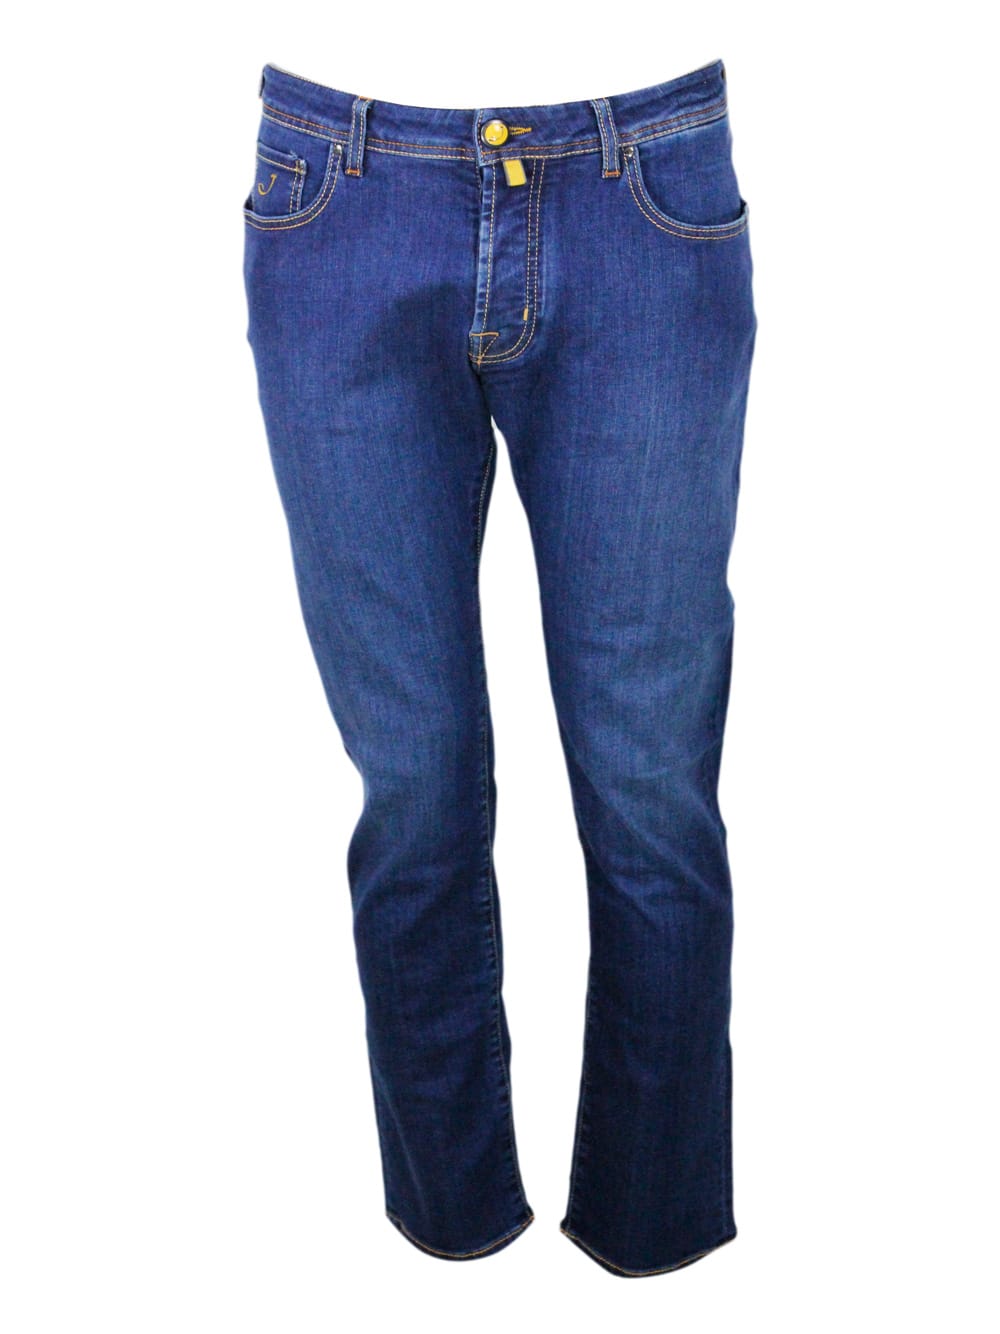 Shop Jacob Cohen Bard J688 Trousers In Luxury Edition Denim In Soft Stretch Denim With 5 Pockets With Closure Buttons